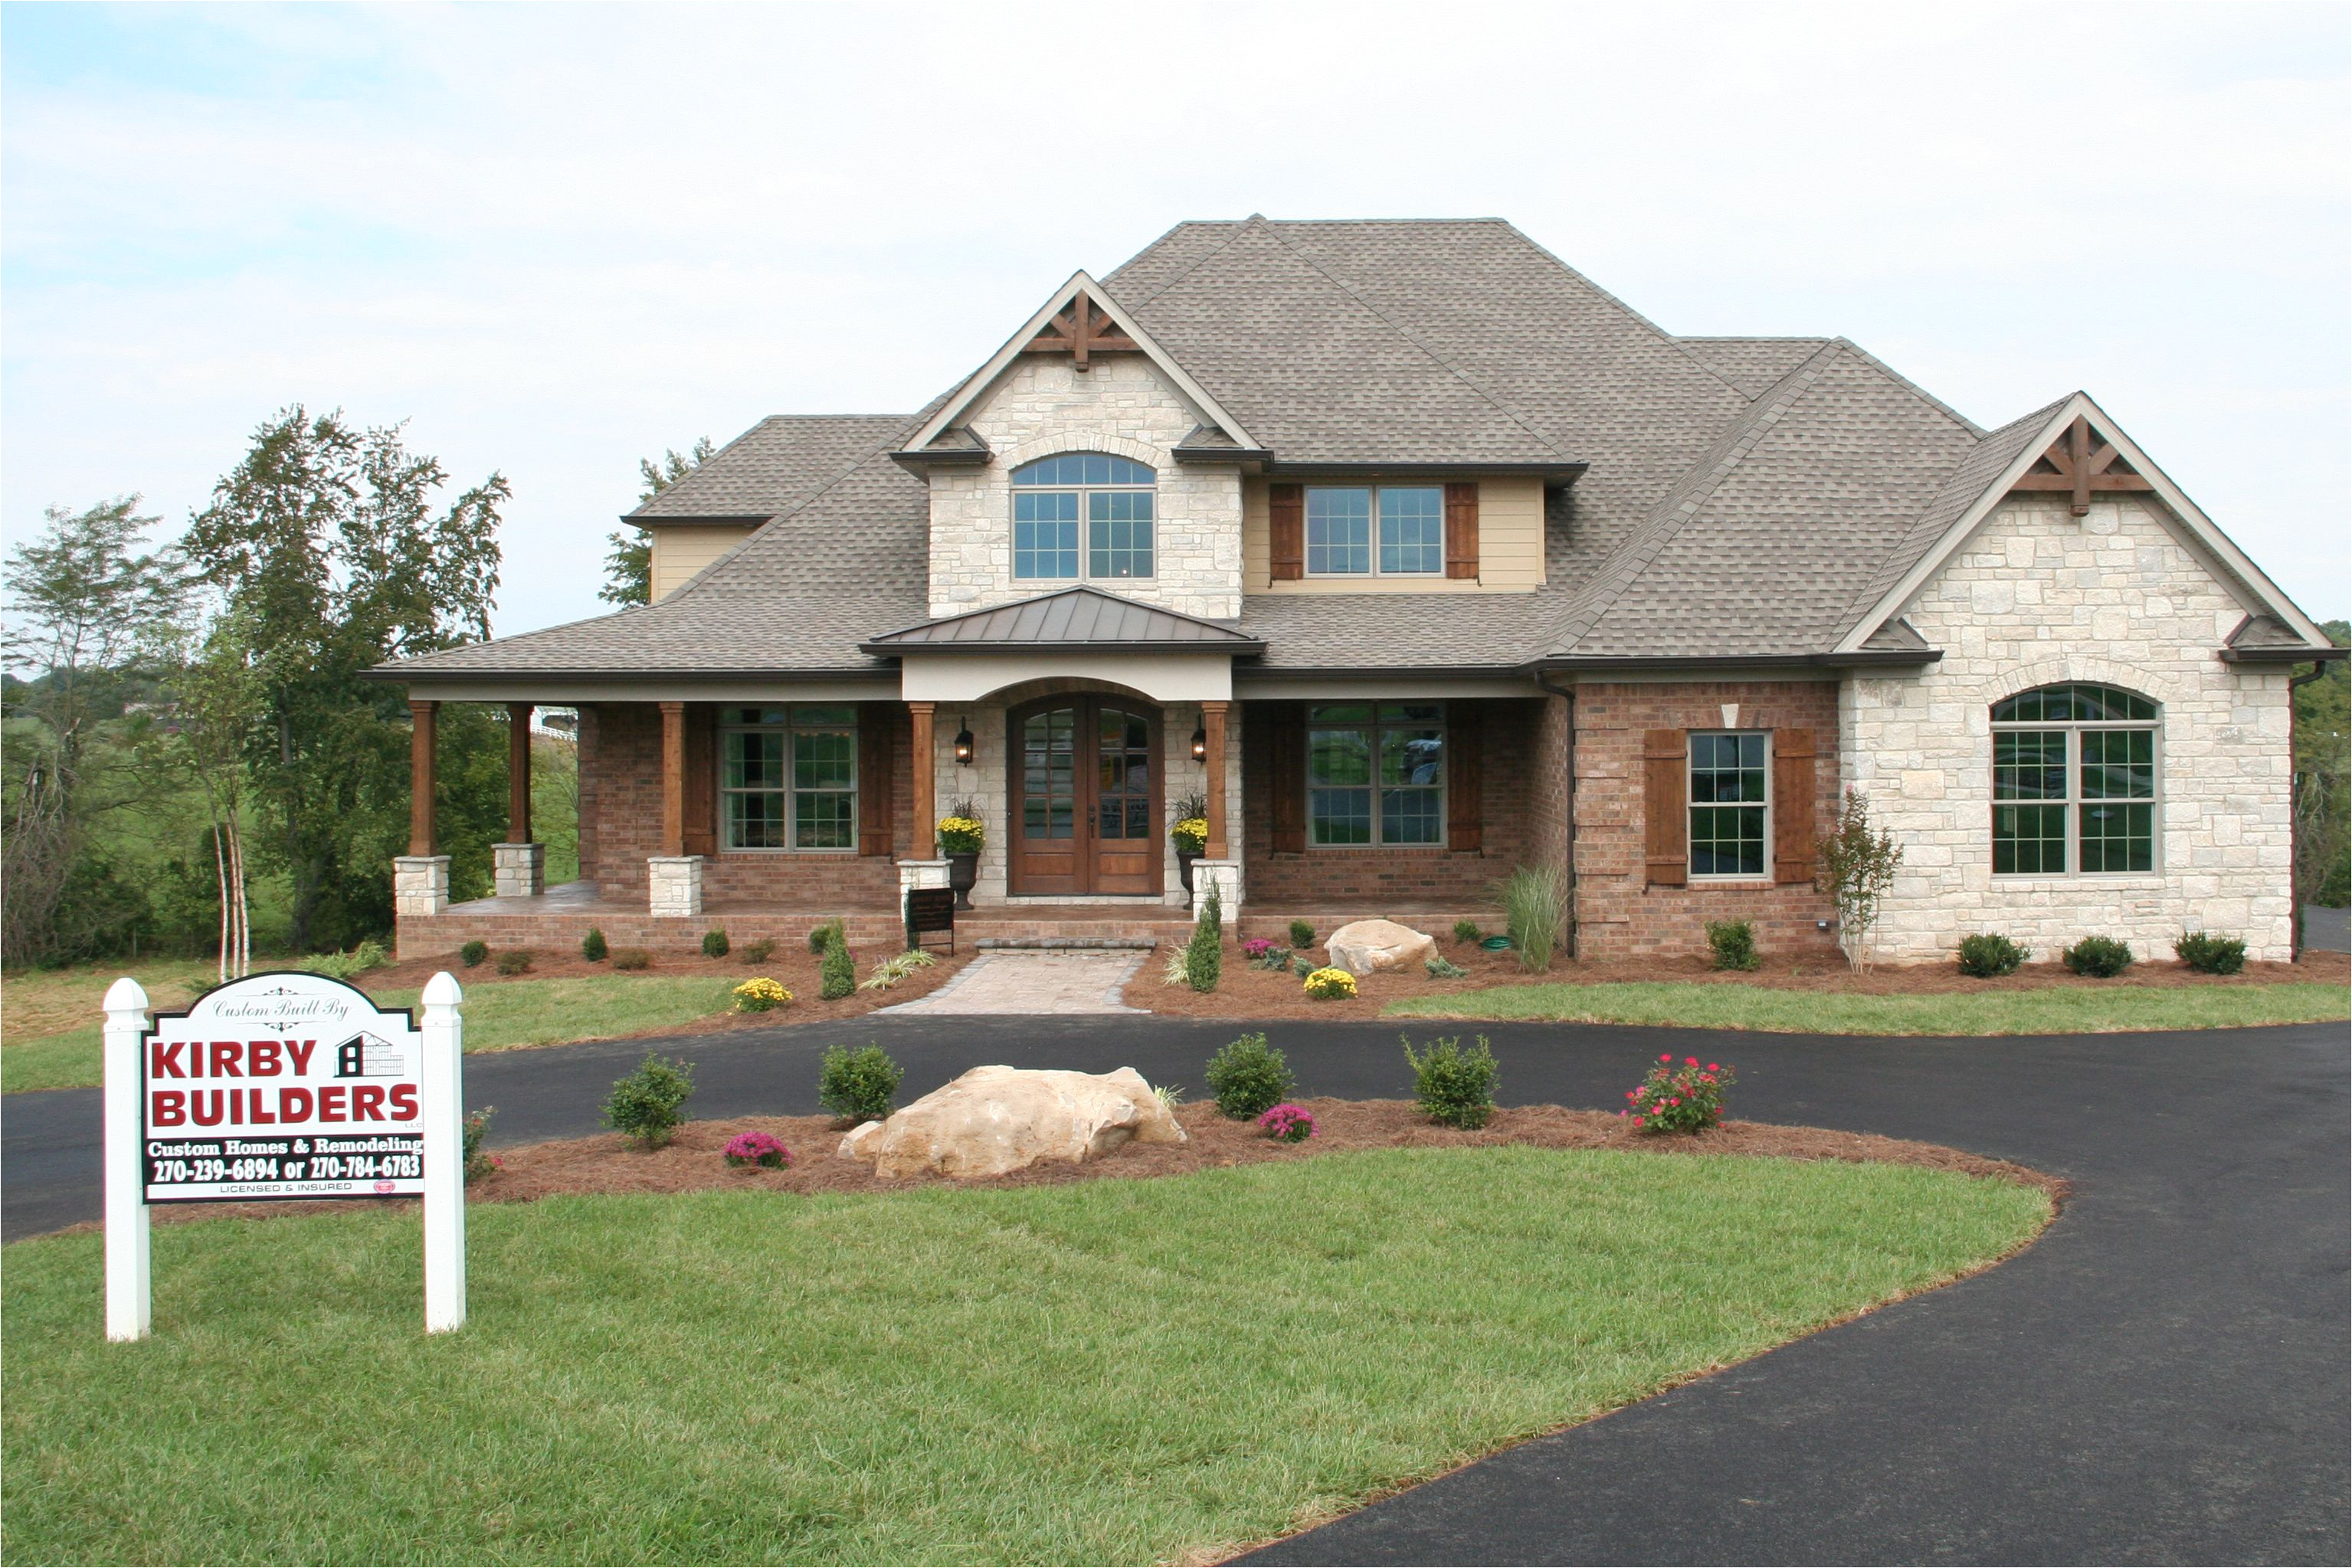 parade of homes 2012 by kirby builders